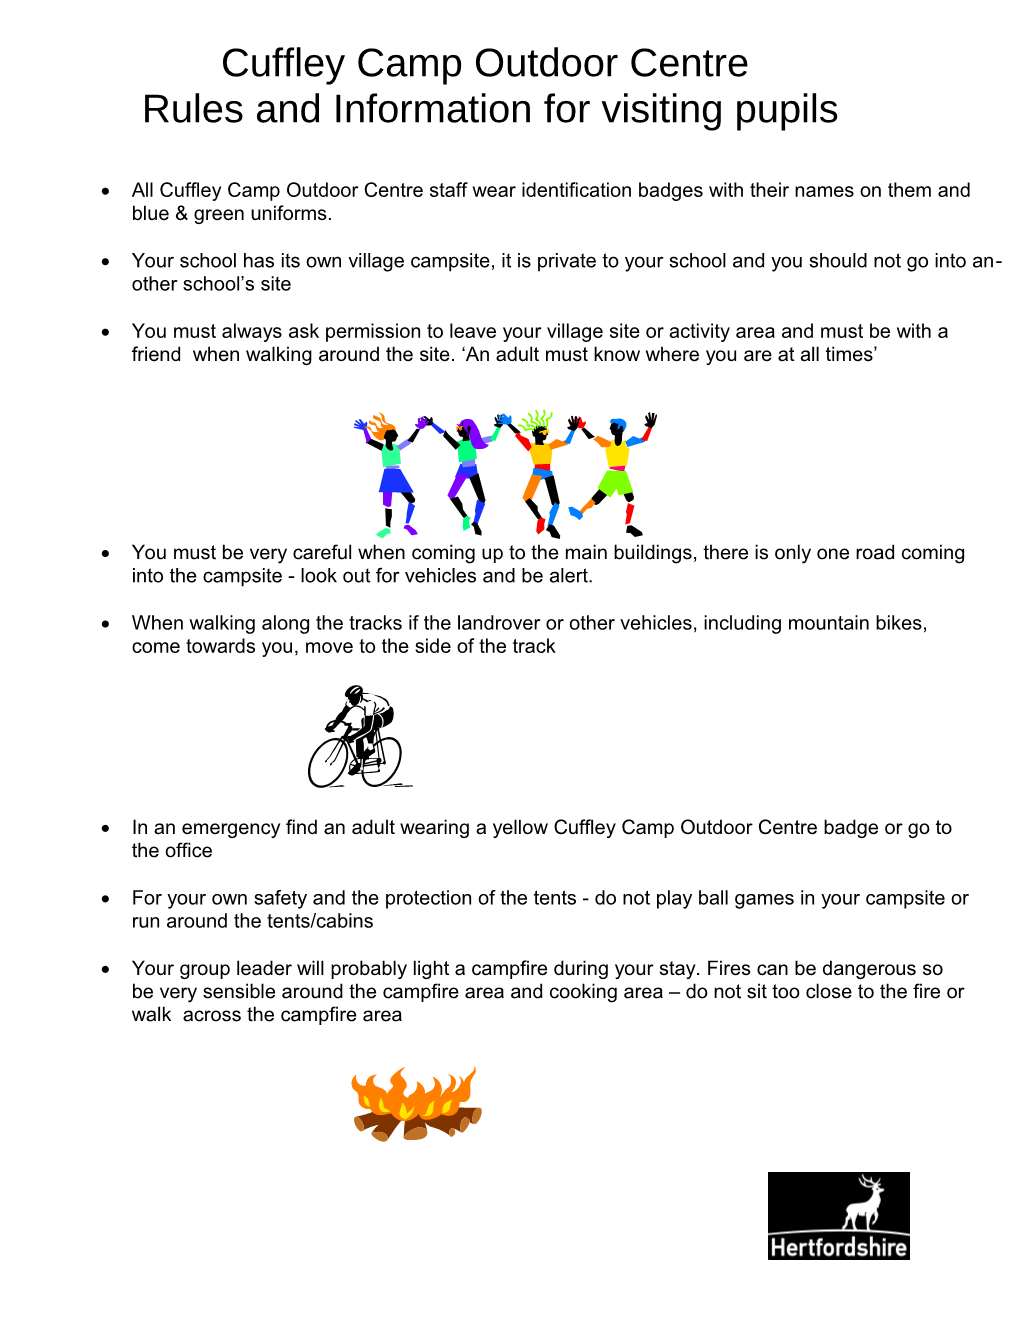 Cuffley Outdoor Centre Rules and Information for Visiting Pupils